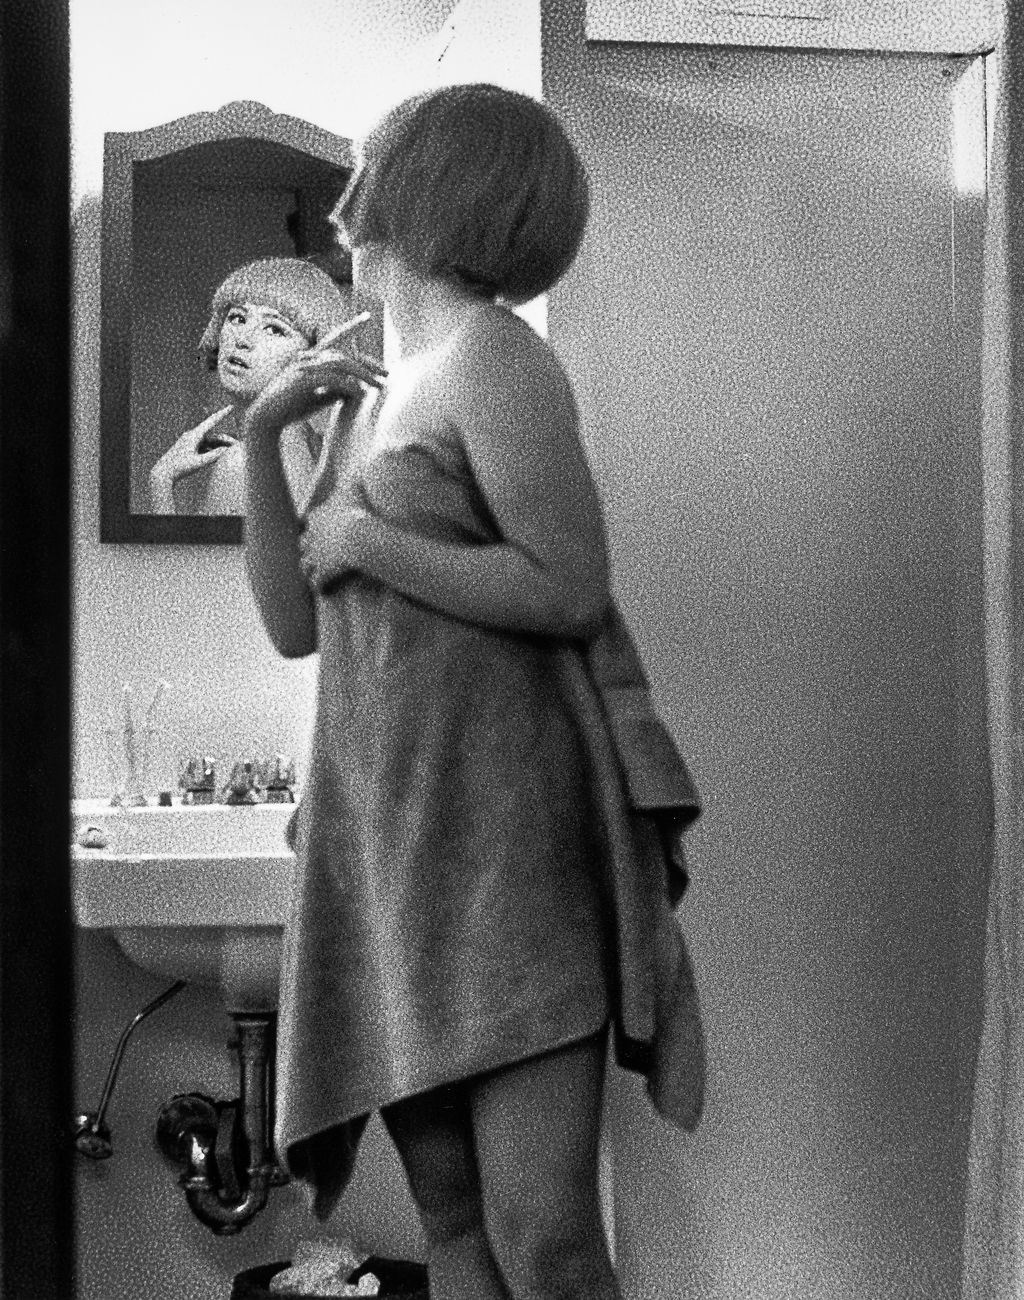 Cindy Sherman, Untitled, film still, 1977. Courtesy of the artist & Metro Pictures, New York